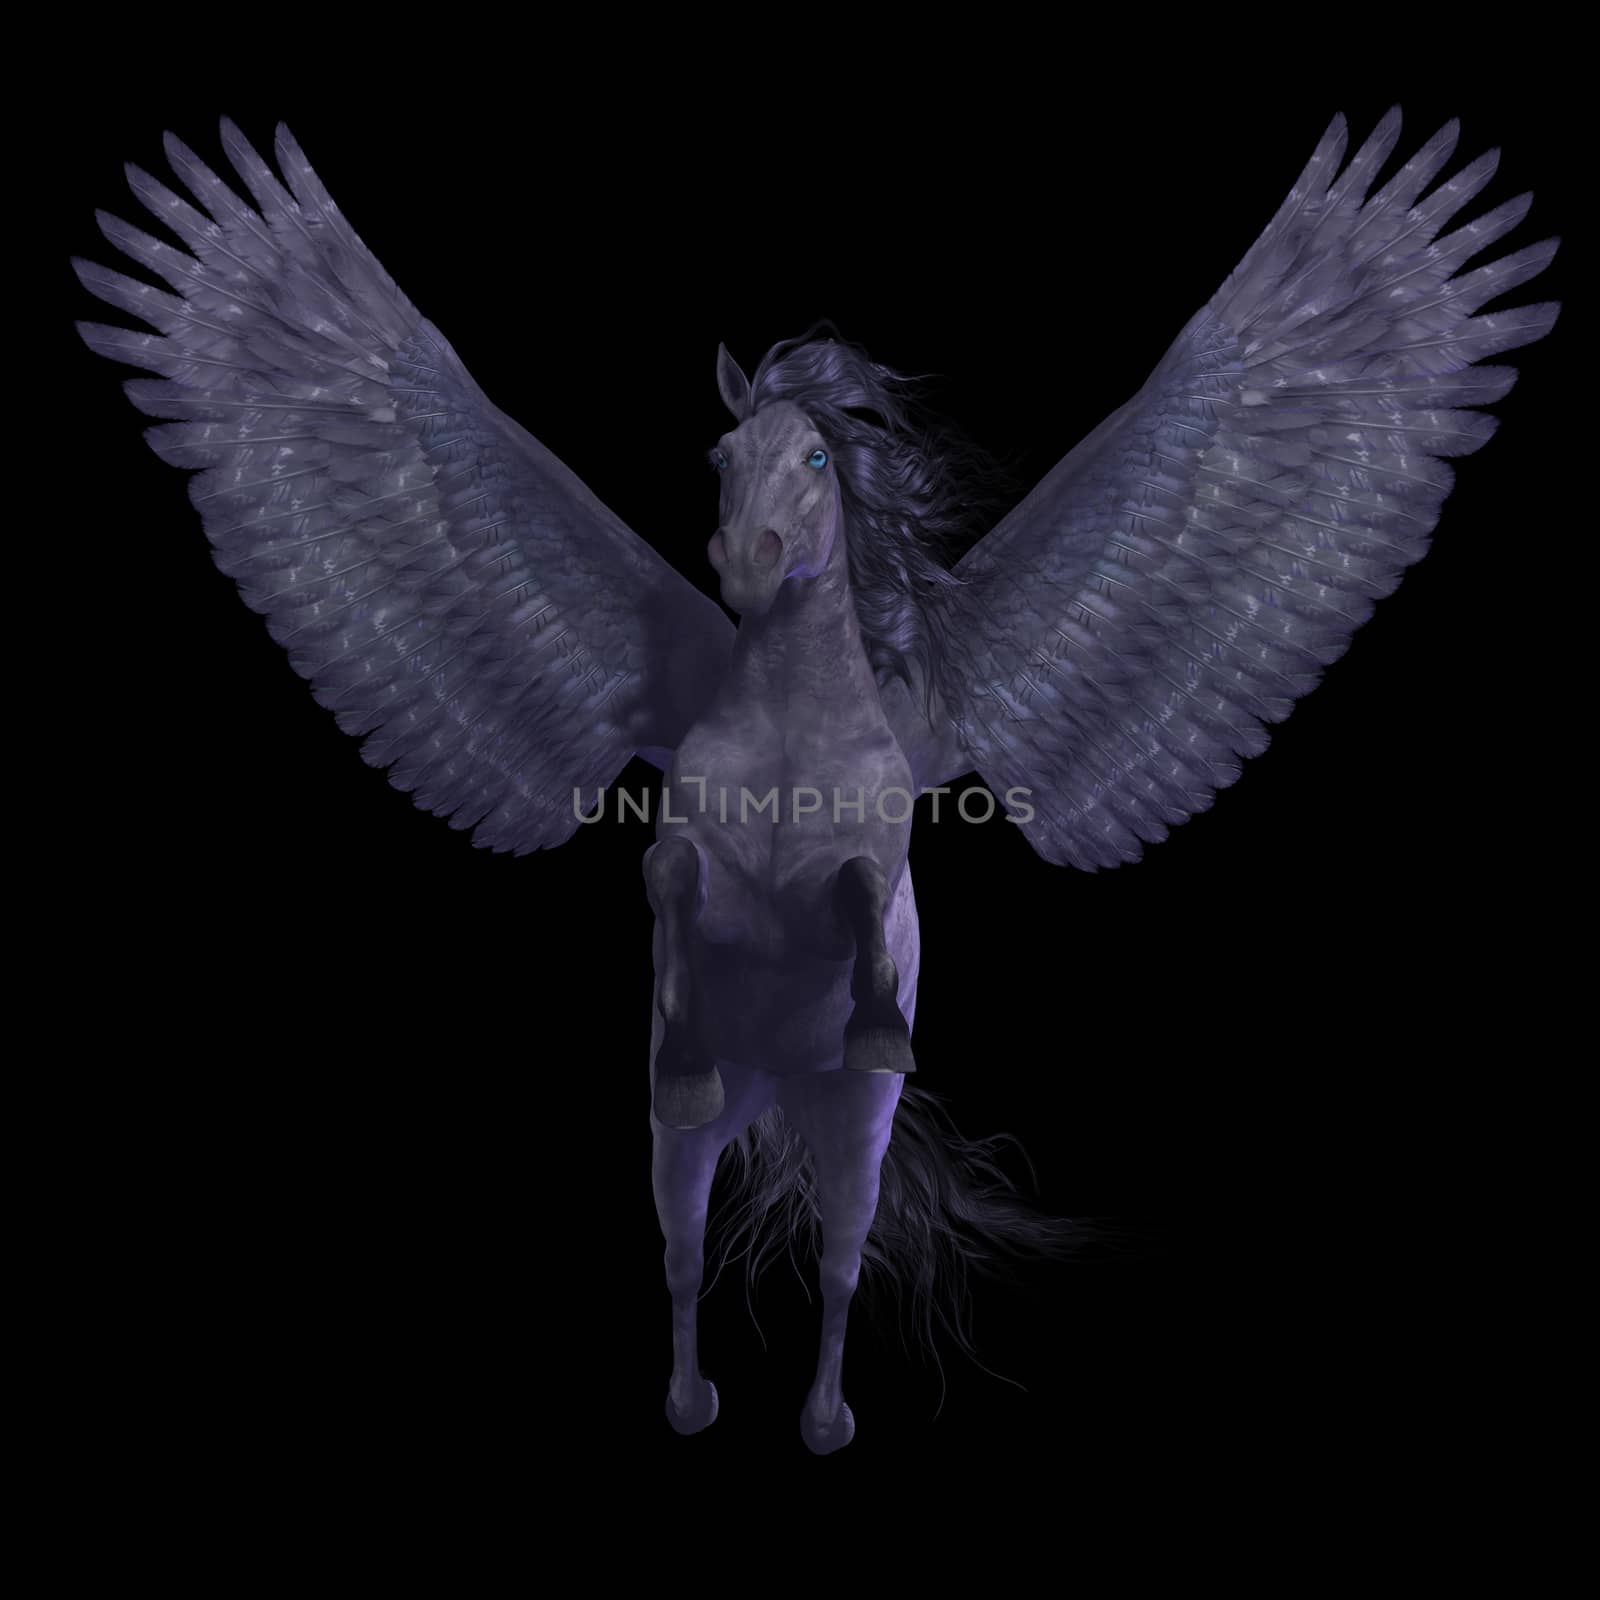 Pegasus is a divine mythical creature that has the form of a winged stallion horse.